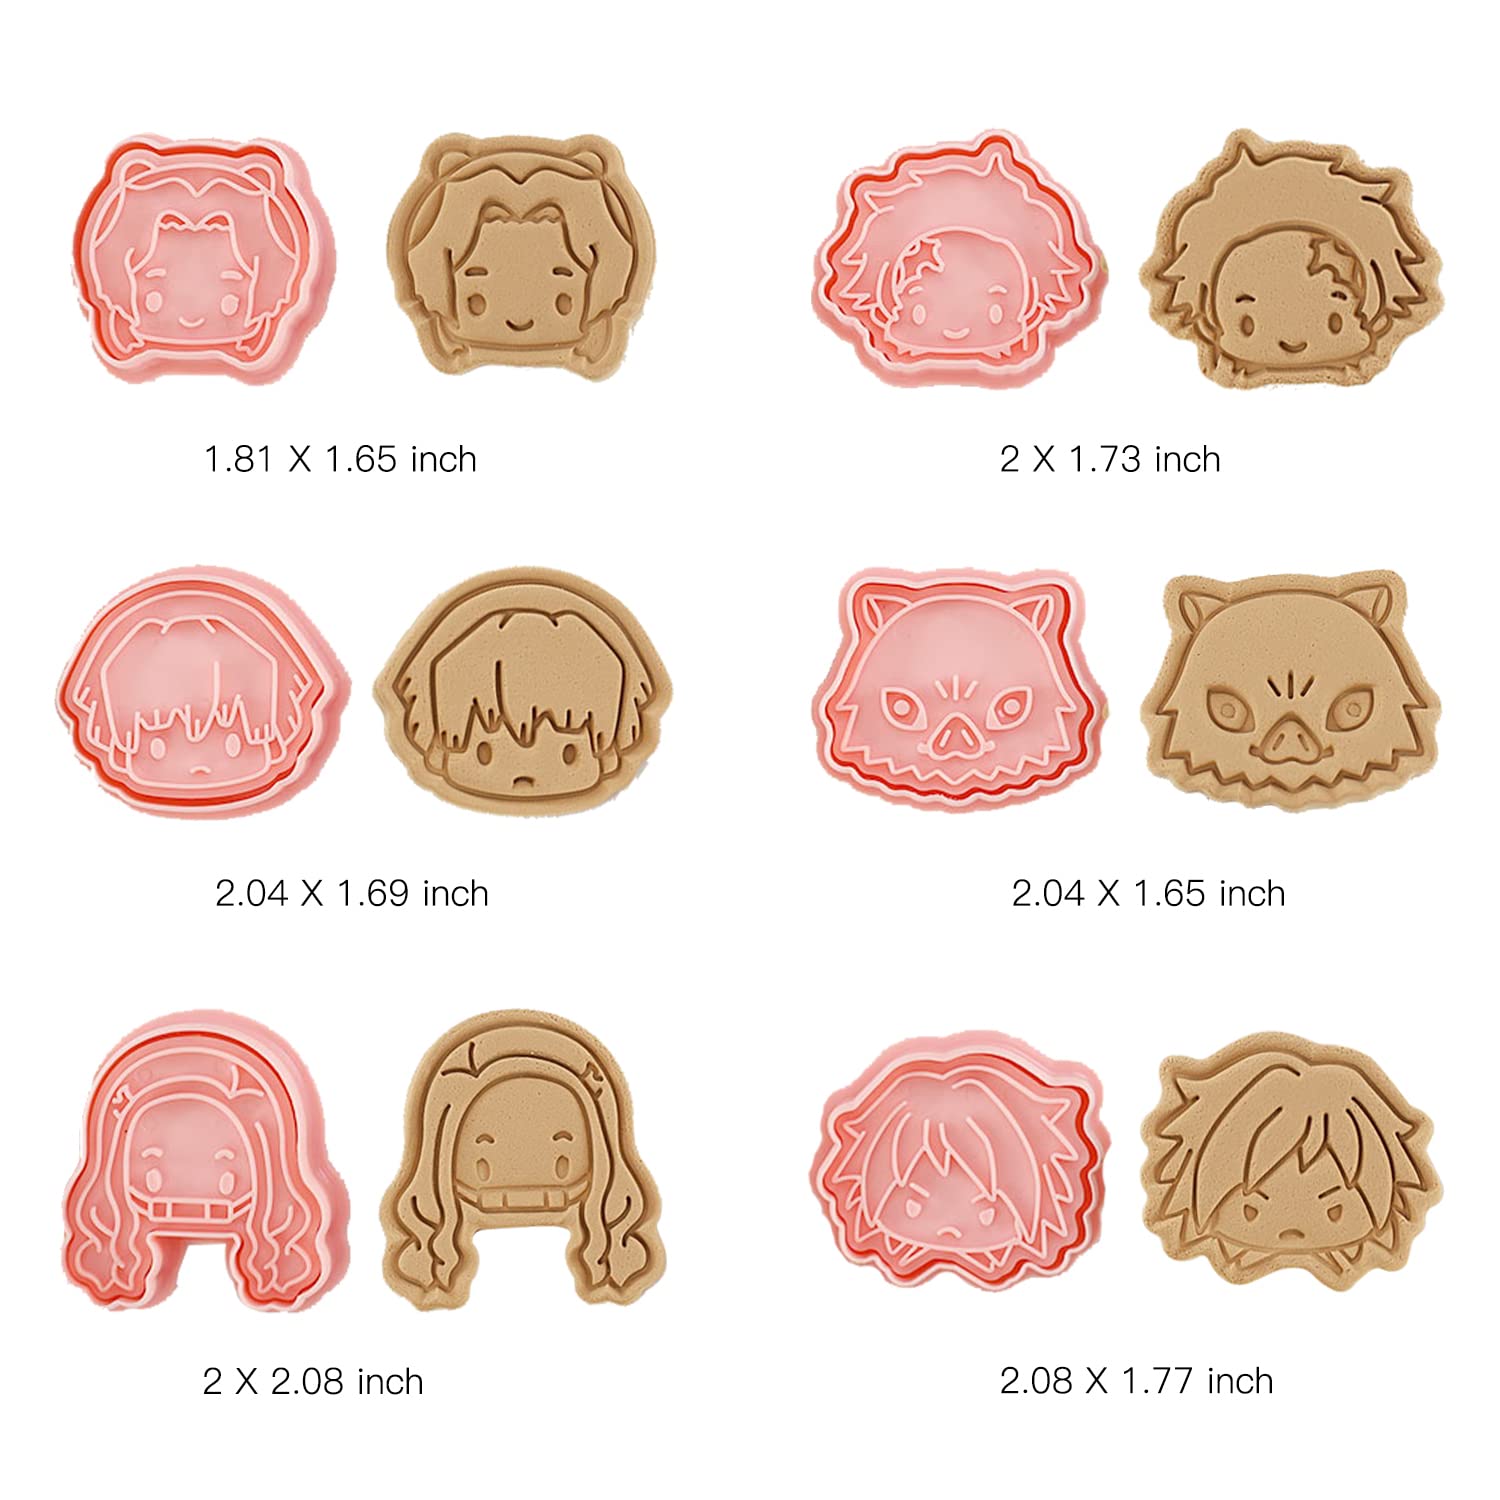 Anime Slayer Cookie Cutter With Plunger Stamps Set,6 Piece Stamped Embossed Cookie Cutter Molds for Biscuit Fondant Cheese Baking Molds